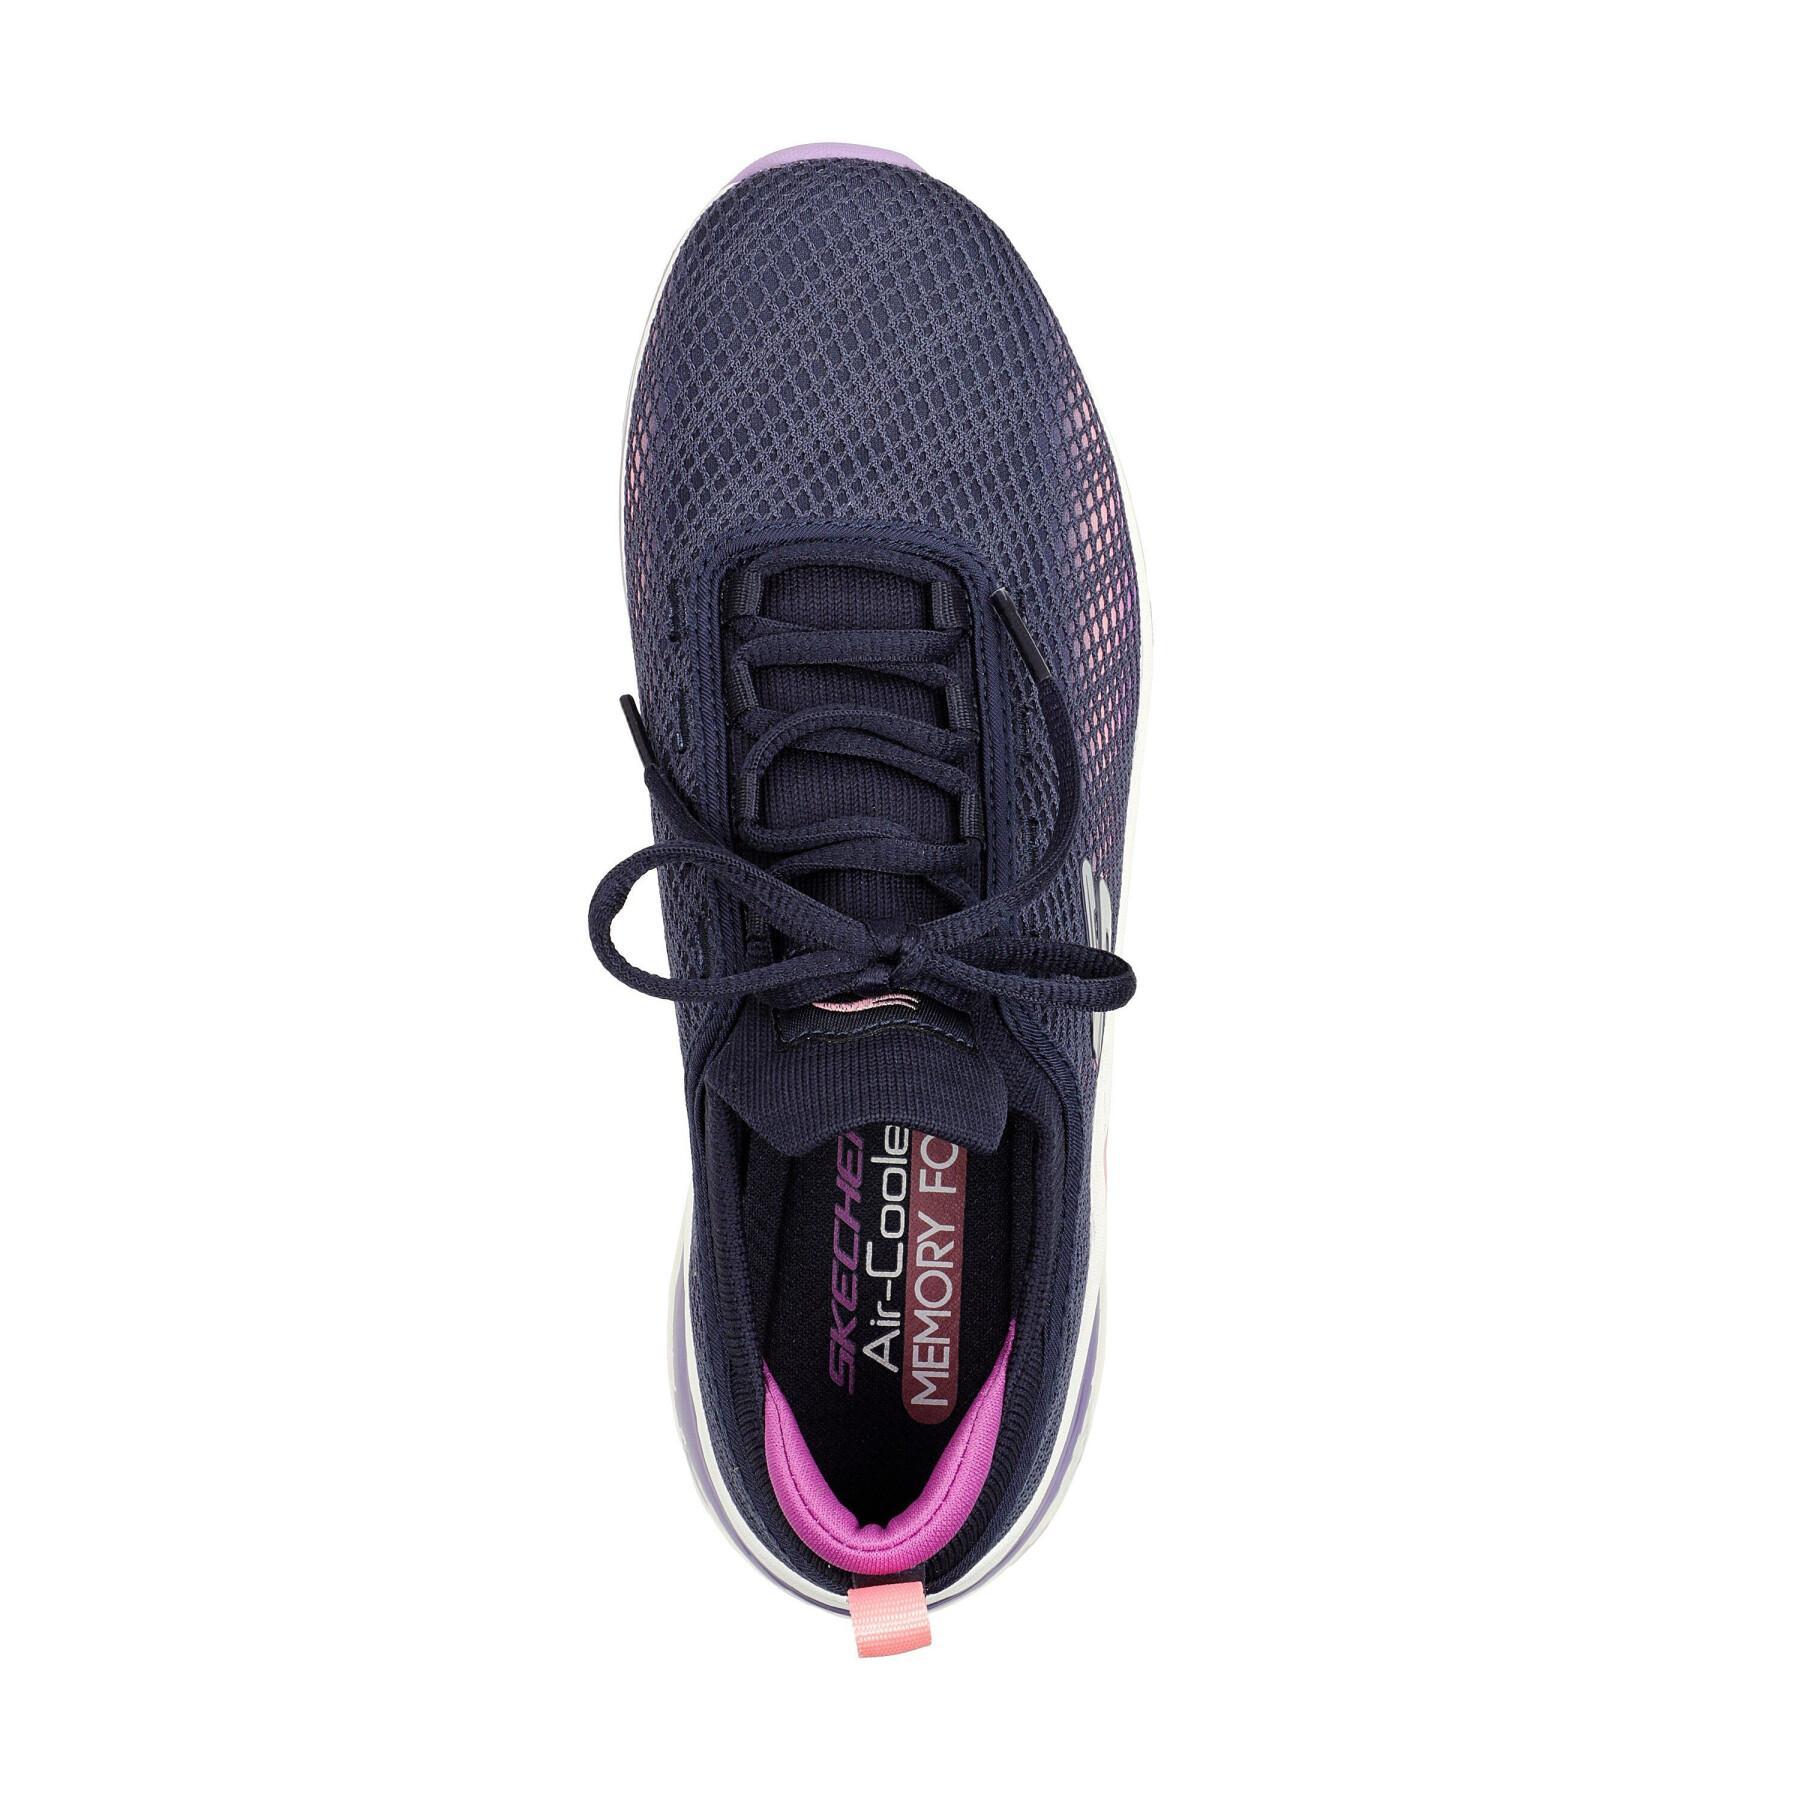 Women's sneakers Skechers Uno - Stand on air